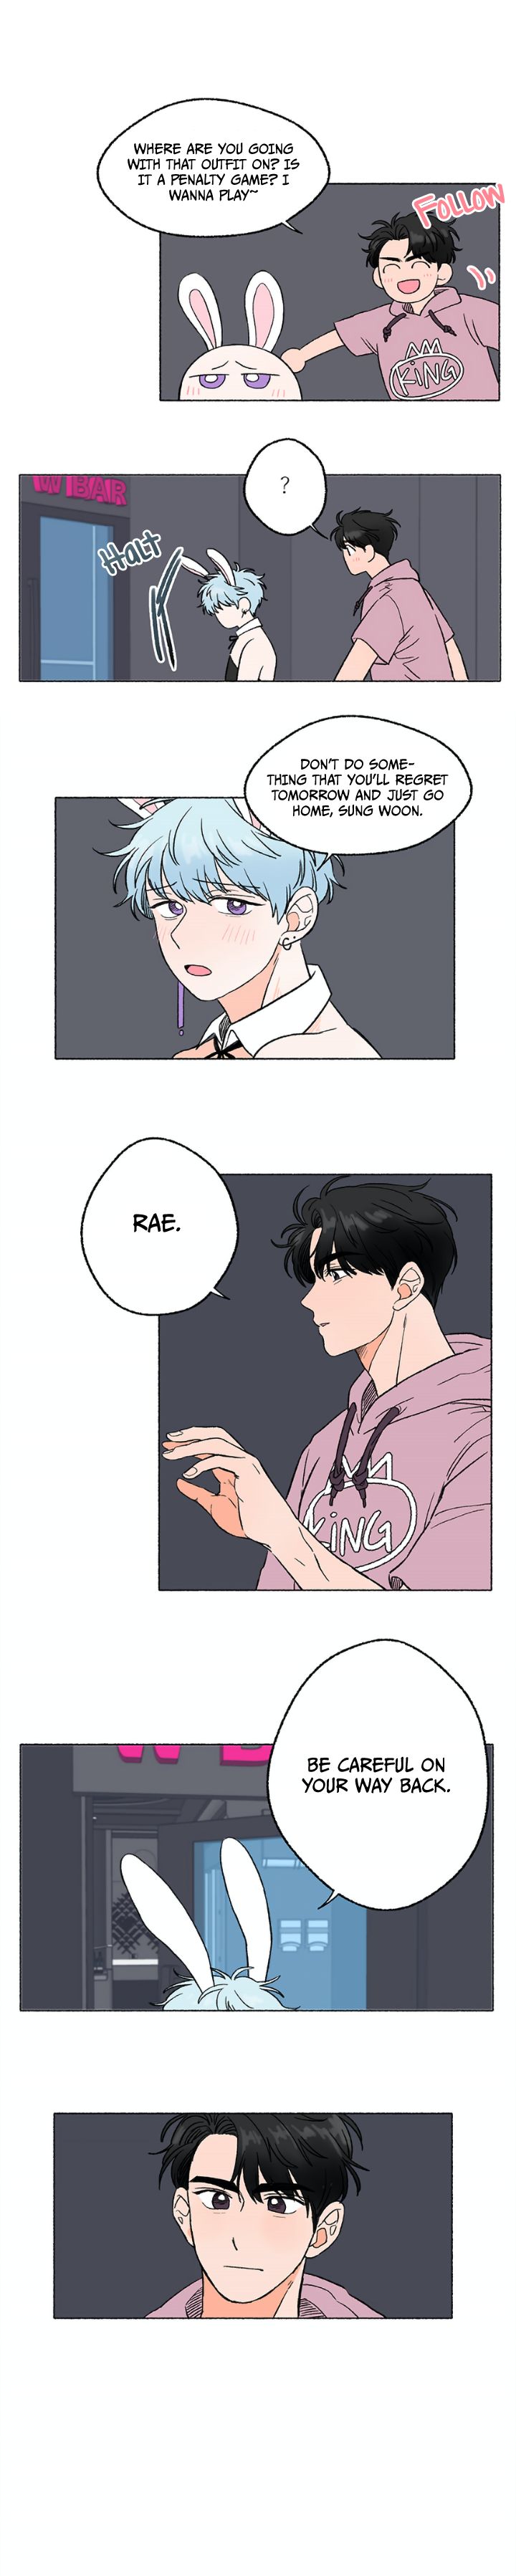 Together With Woo Rae - chapter 2 - #2